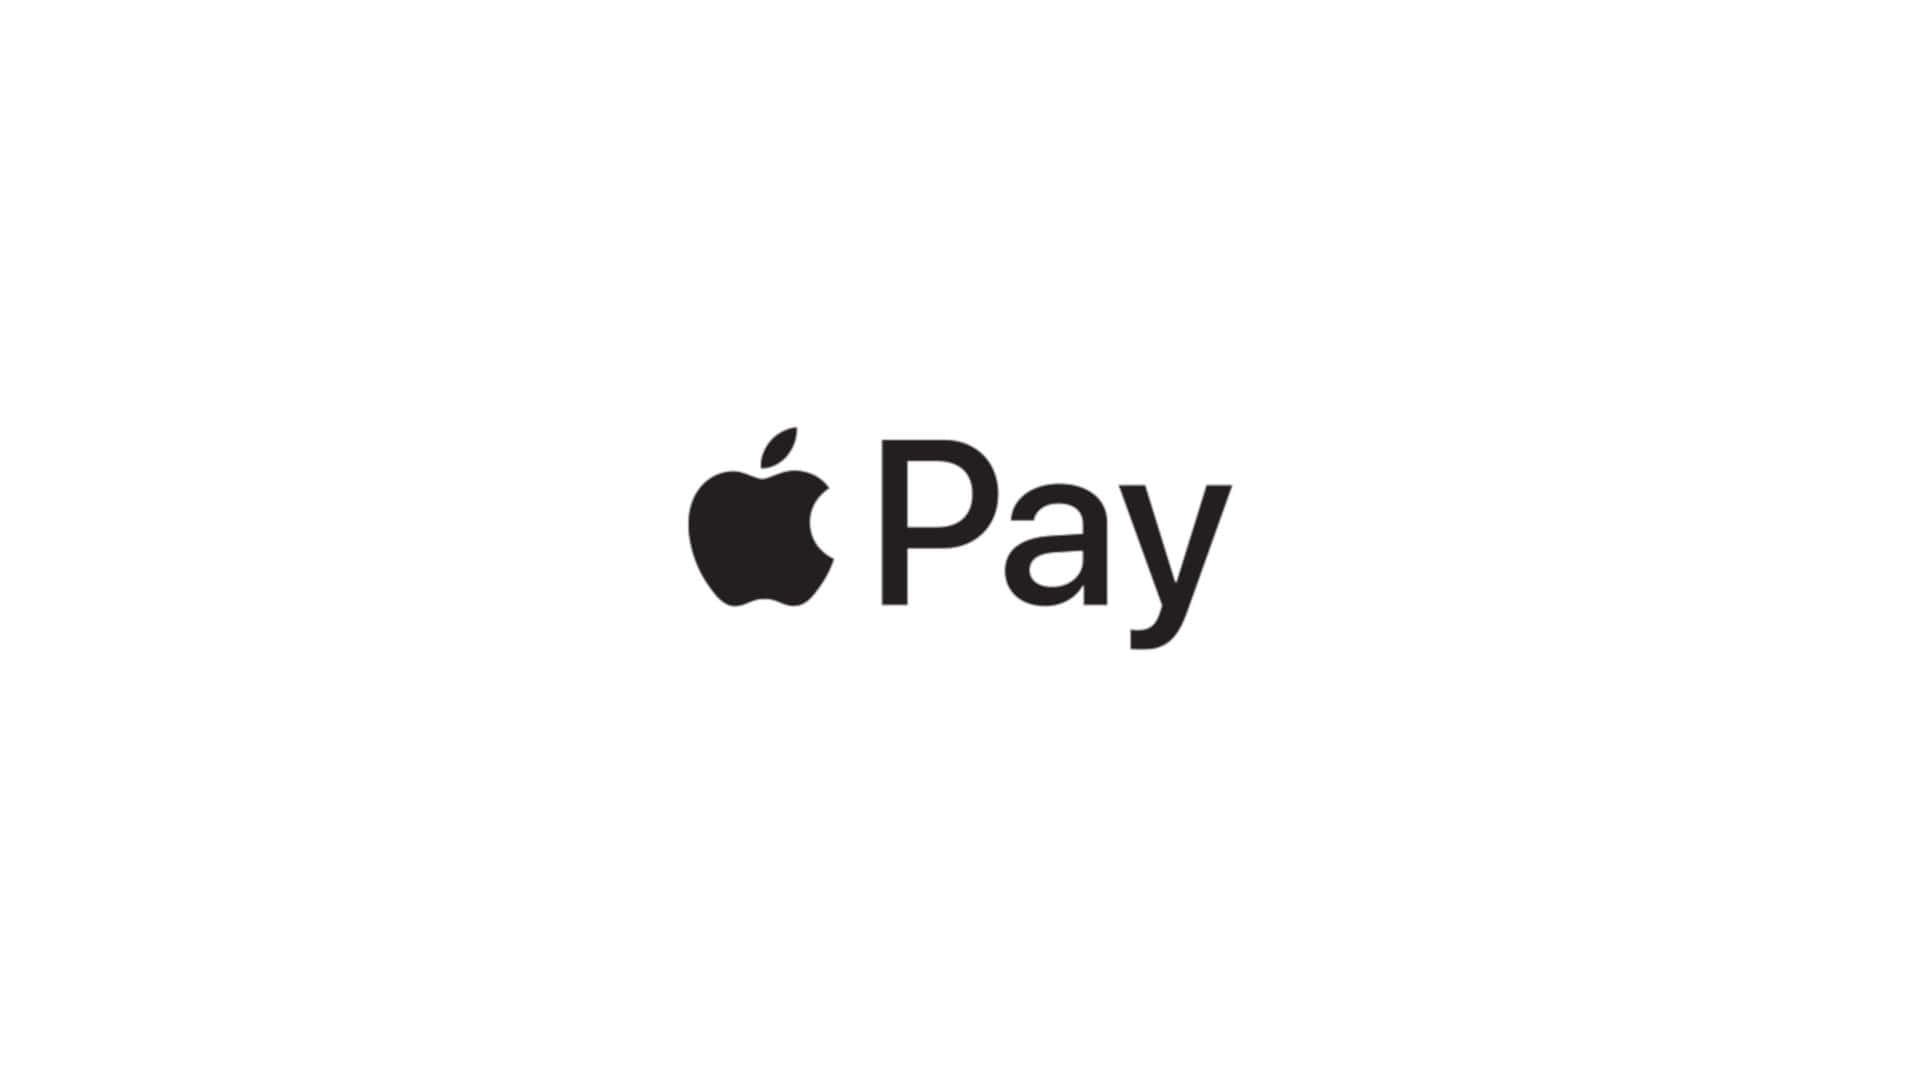 Apple Pay Logo On A White Background